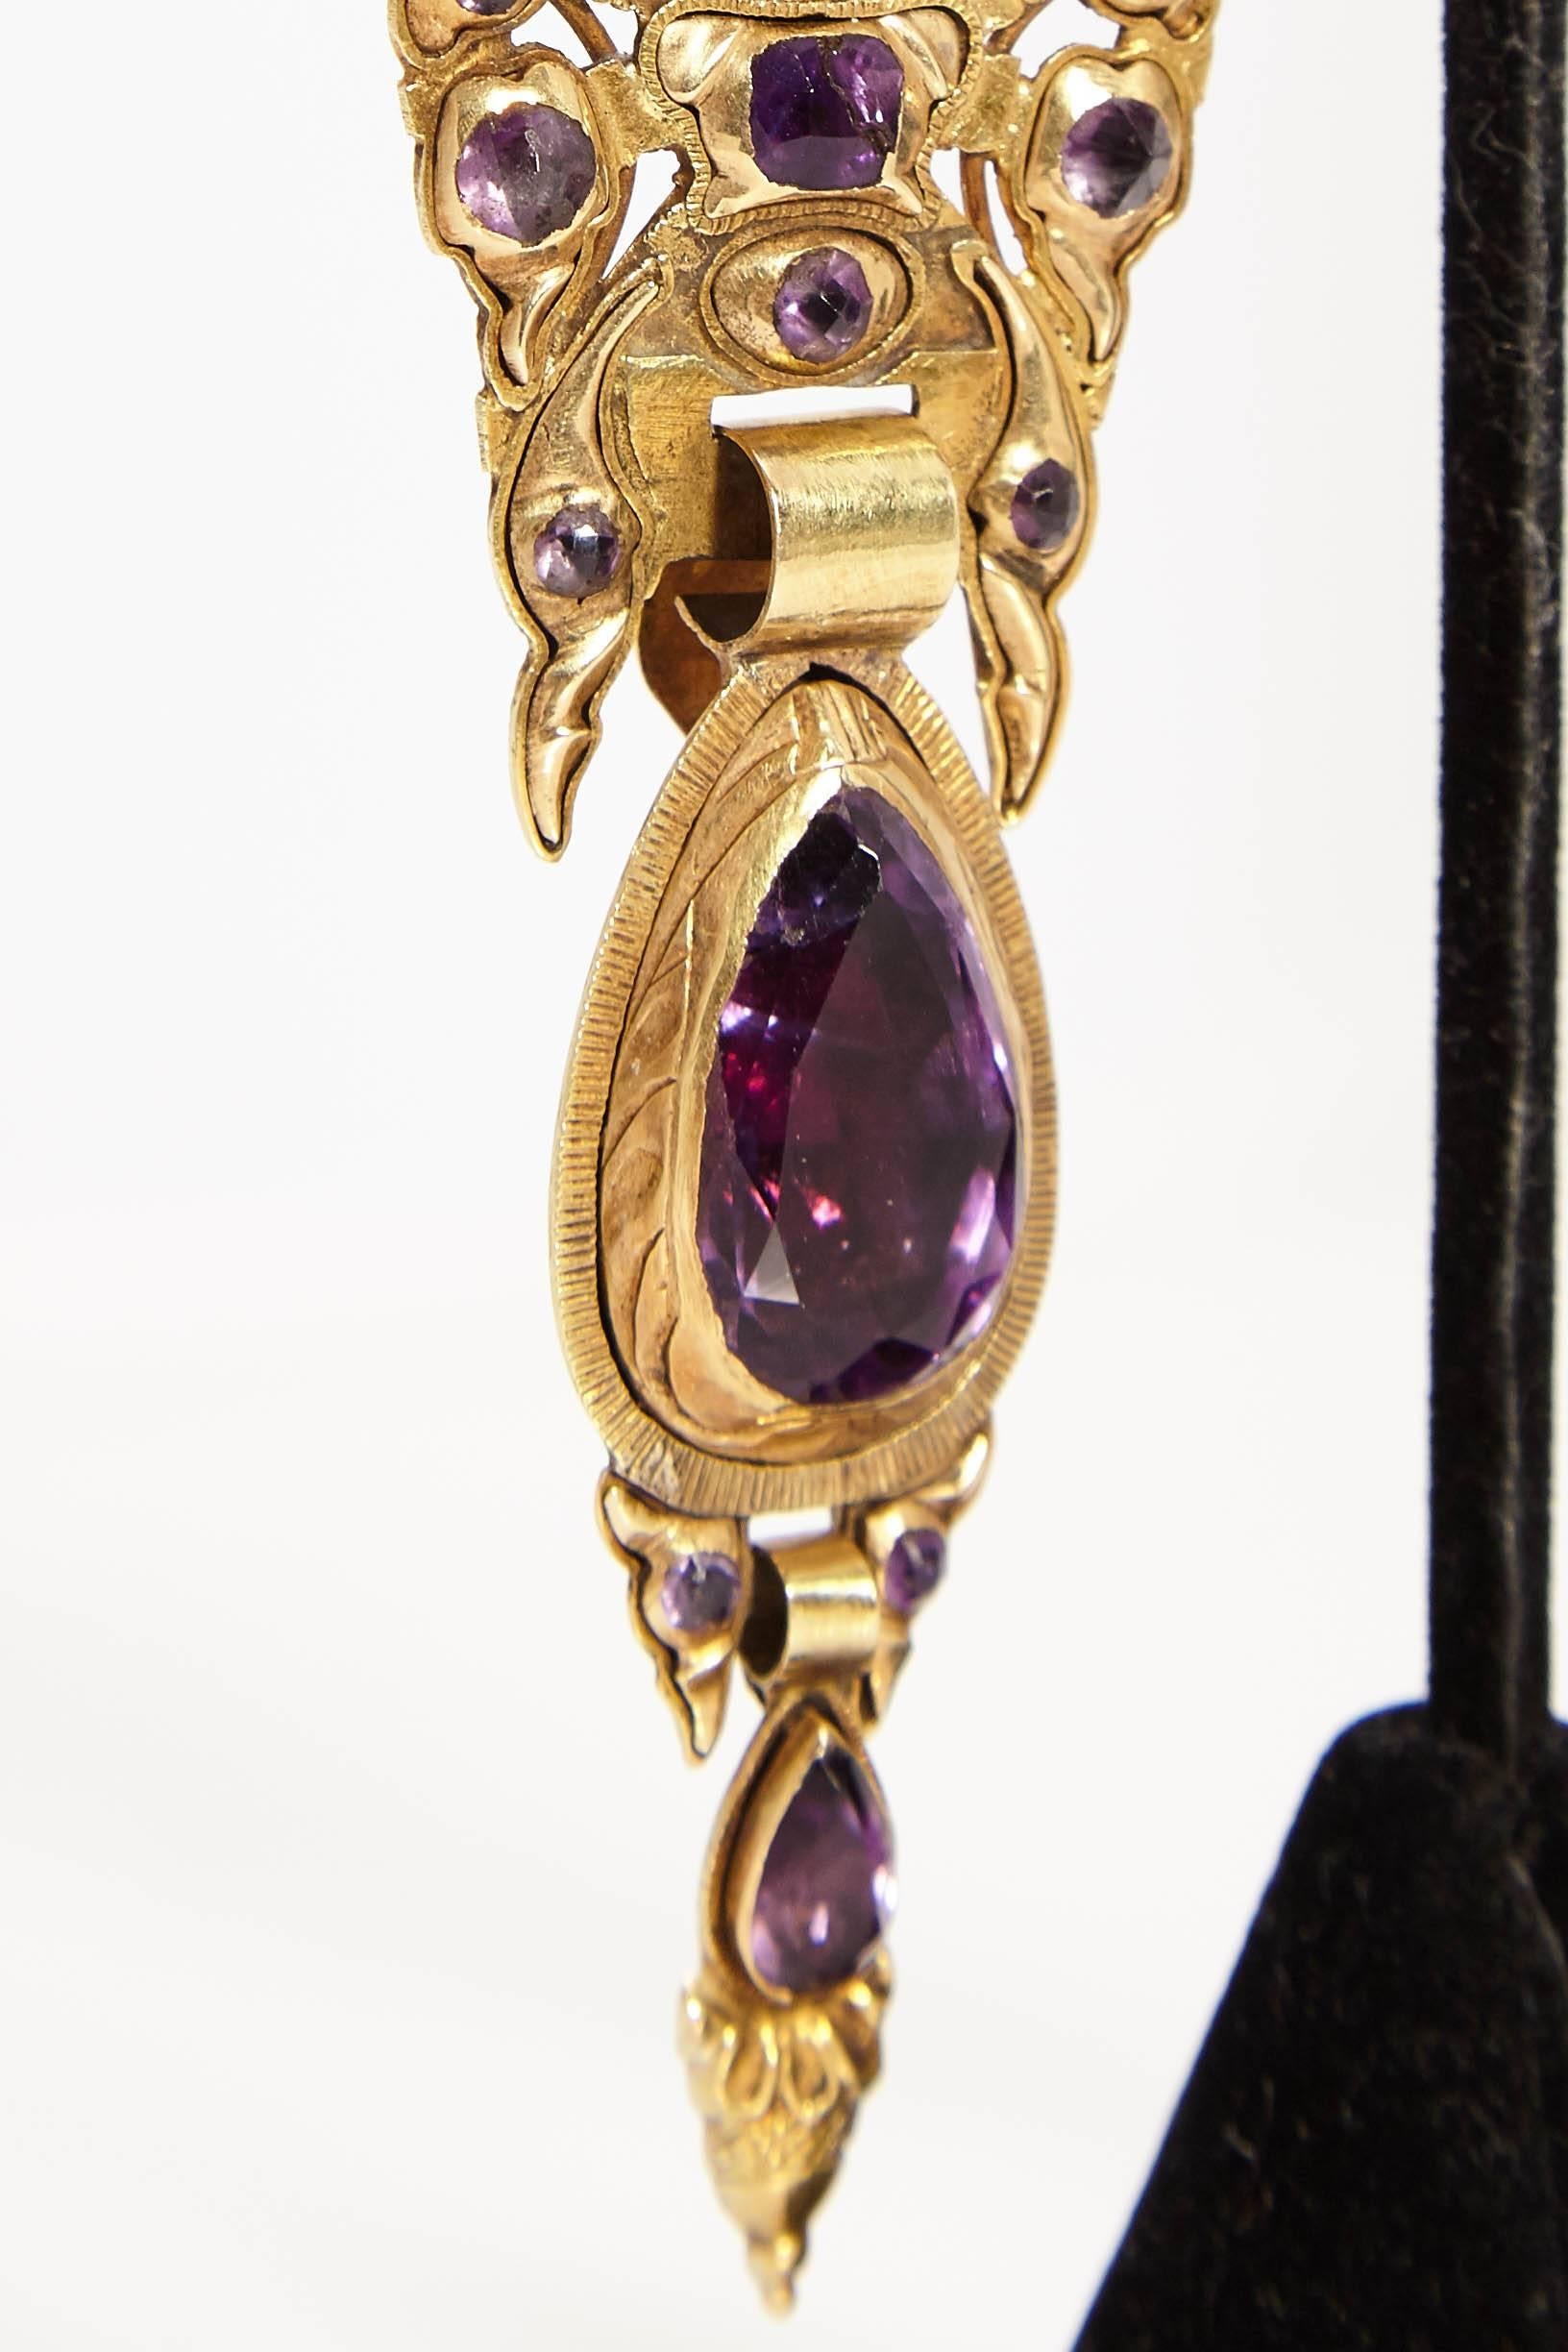 A pair of long amethyst and gold ear pendants. Made in Spain, circa 1850